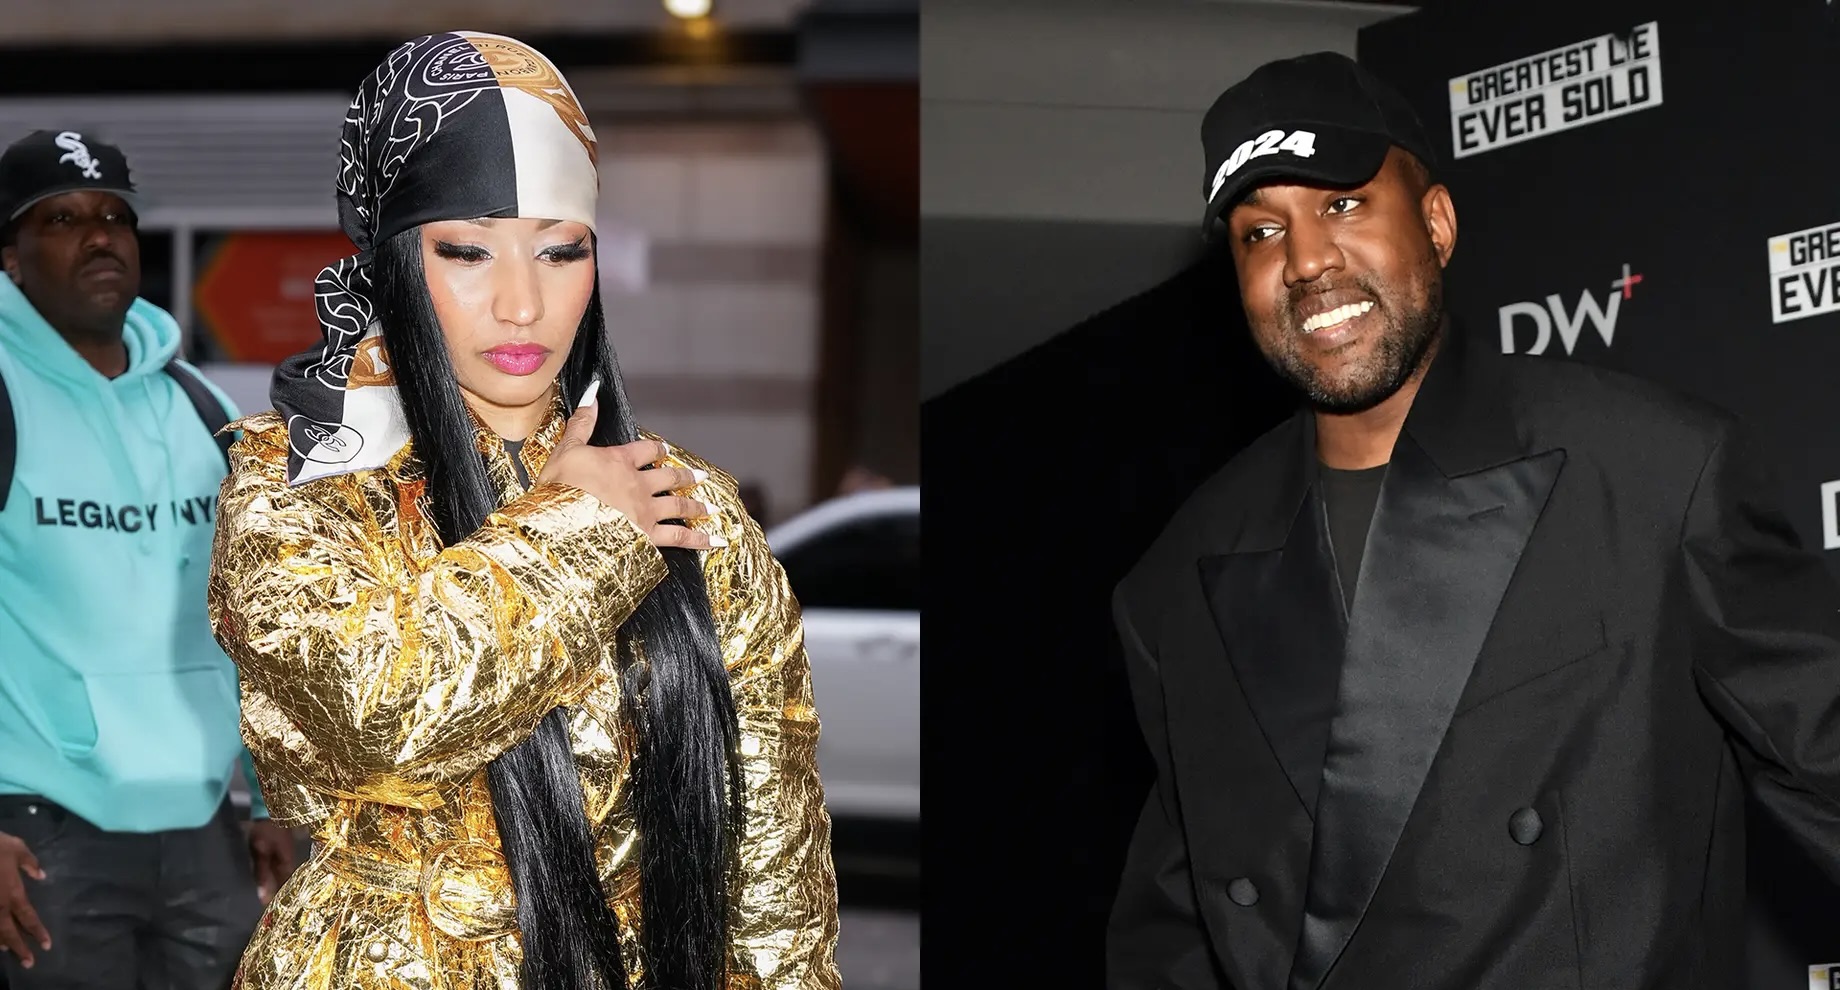 Nicki Minaj Won’t Clear “New Body” Verse for Kanye West: ‘That Train Has Left the Station’